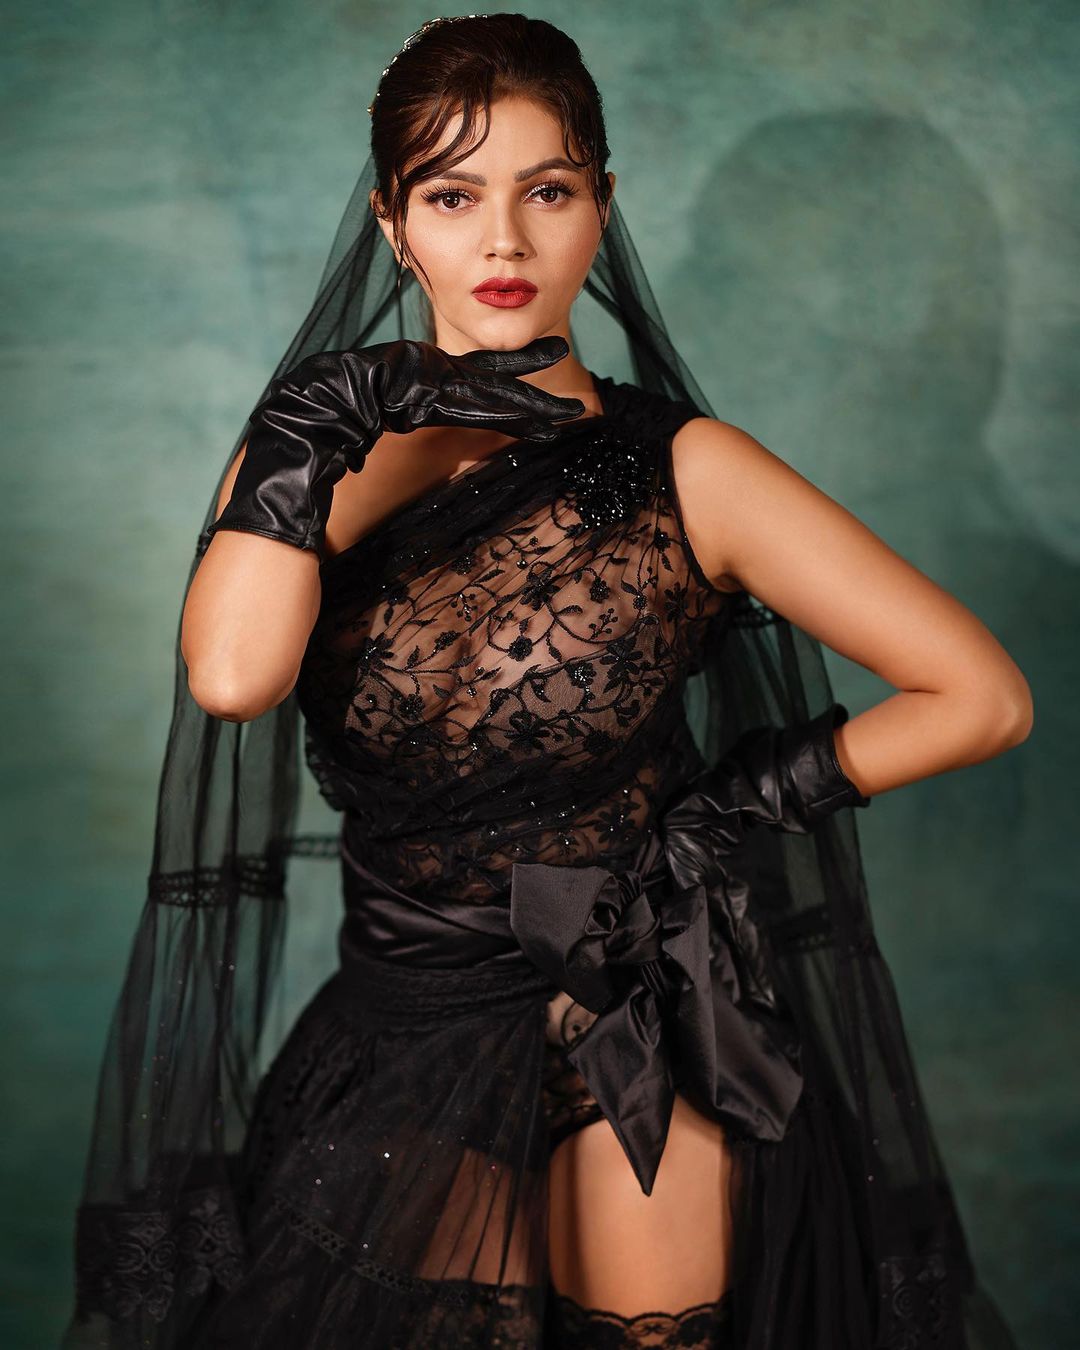 Rubina Dilaik is gearing up for her Bollywood release